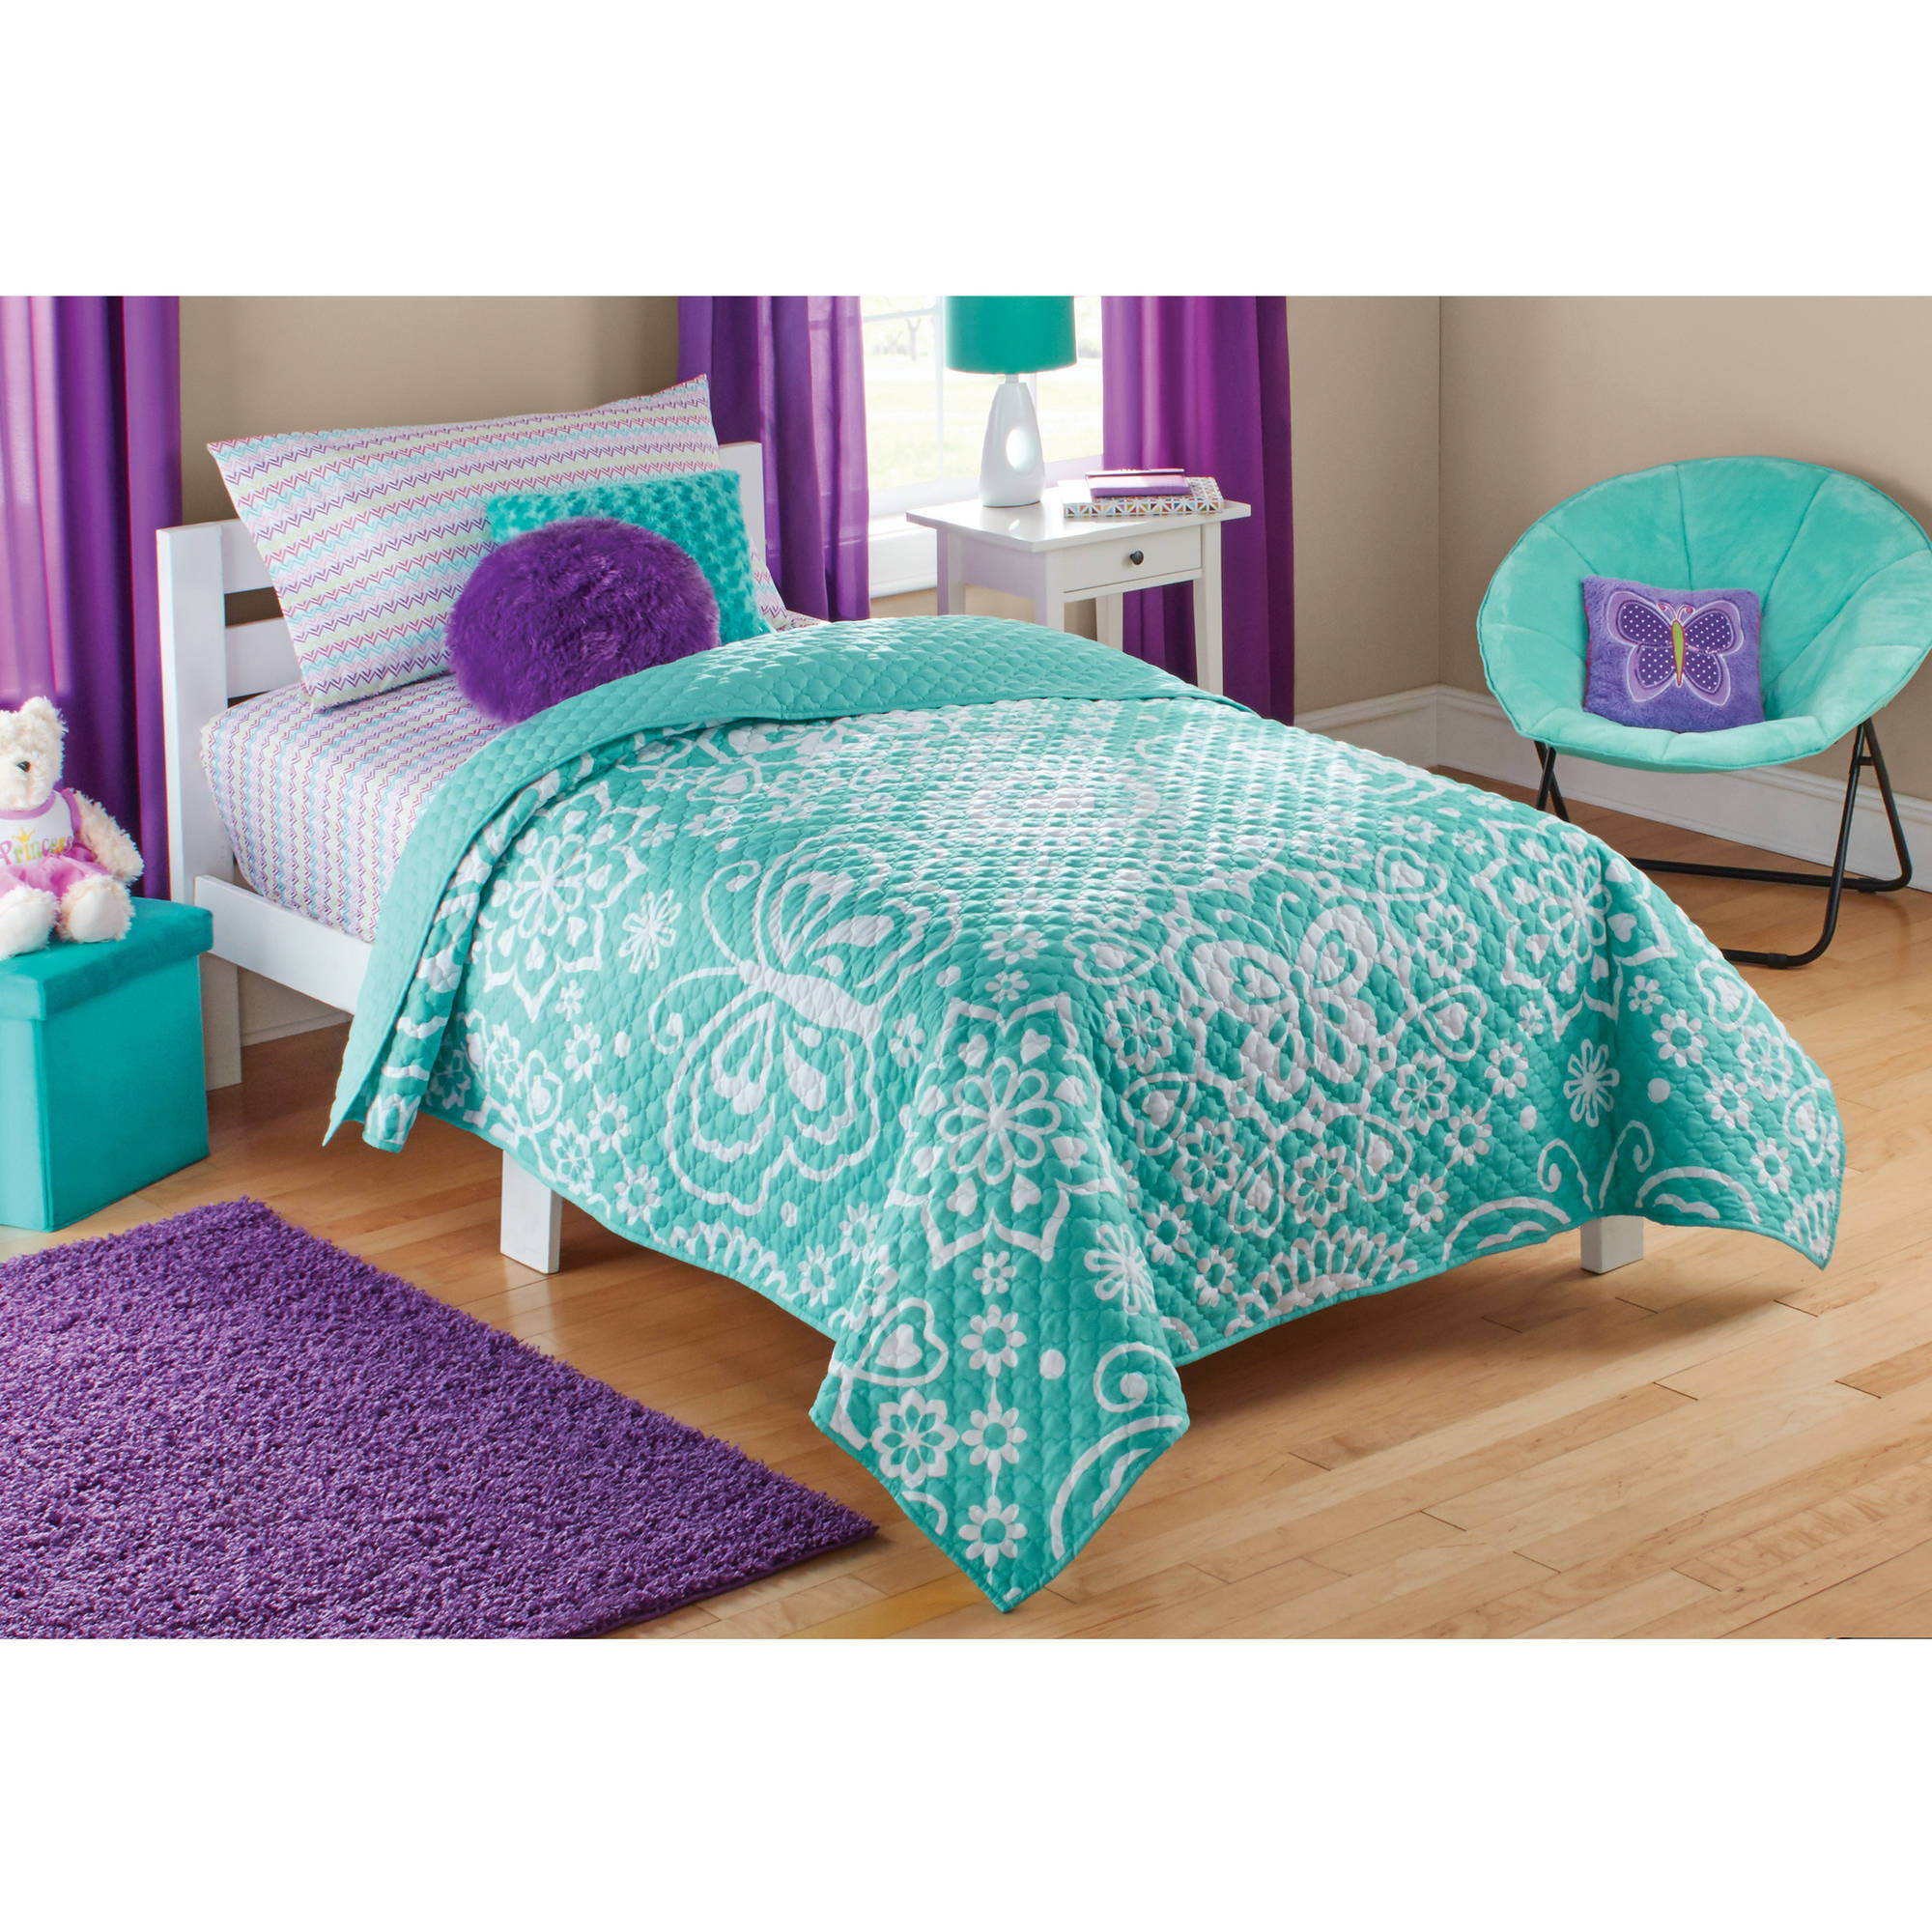 Kids Bedroom Sets Walmart
 Mainstays Kids Purple Butterfly Coordinated Bed in a Bag